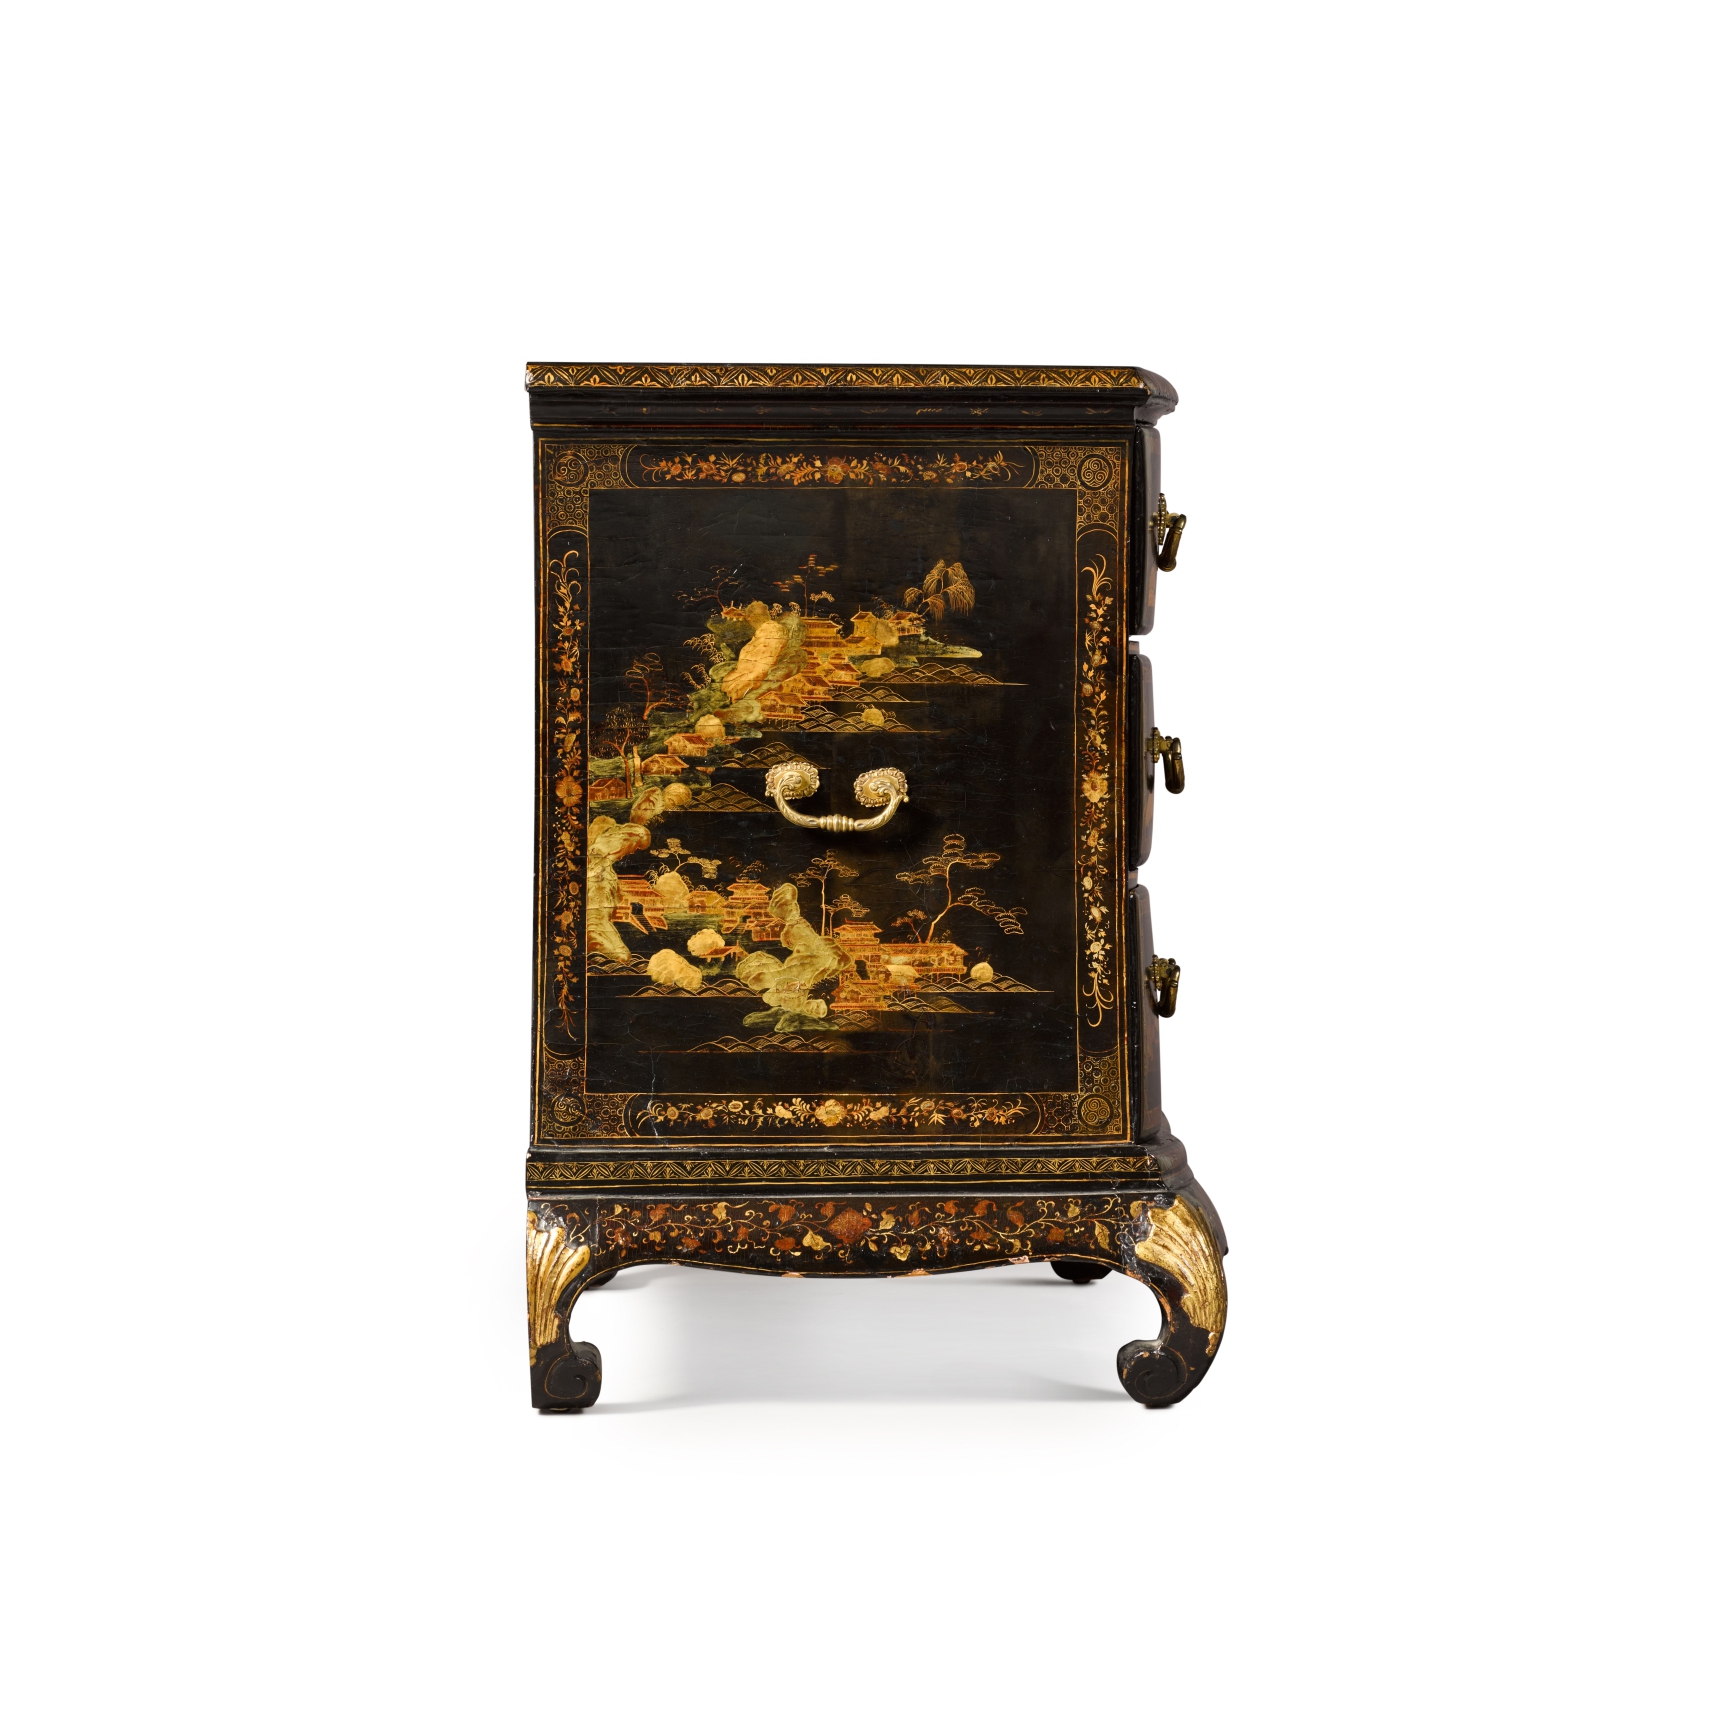 A Chinese export black gilt and polychrome lacquer commode, mid-18th century - Image 3 of 6